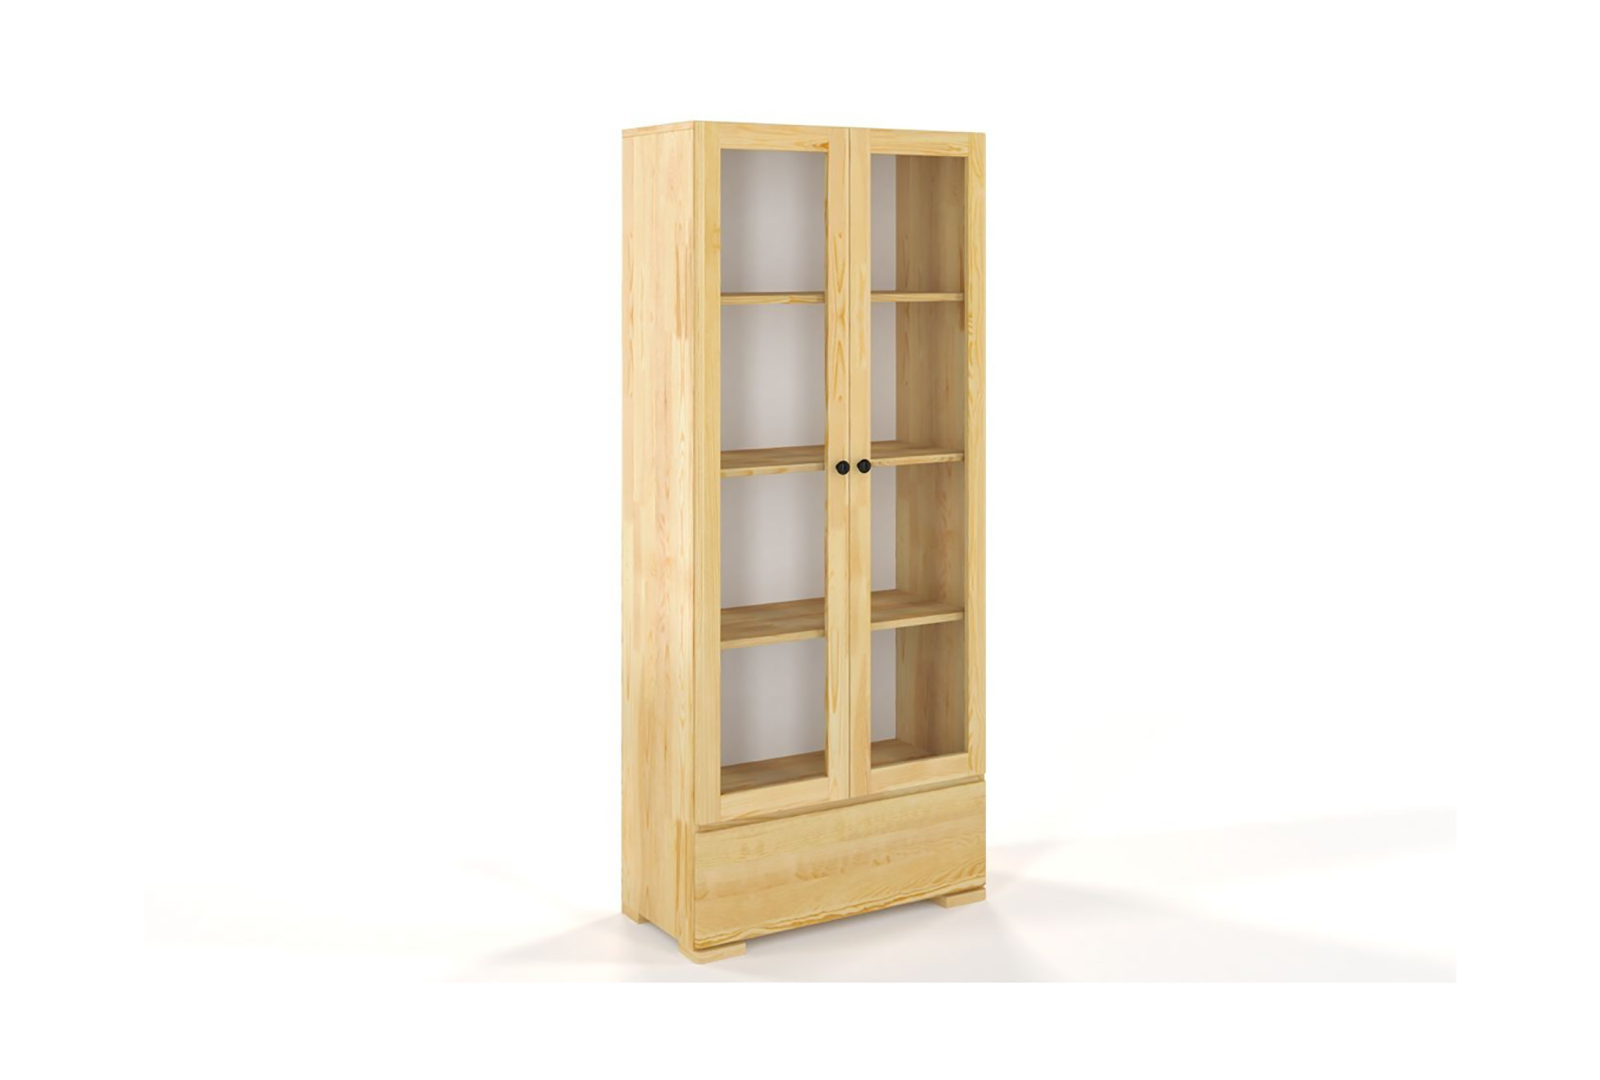 WOODEN PINE DISPLAY CABINET WITH GLASS DOORS VISBY SANDEMO 1S80 3